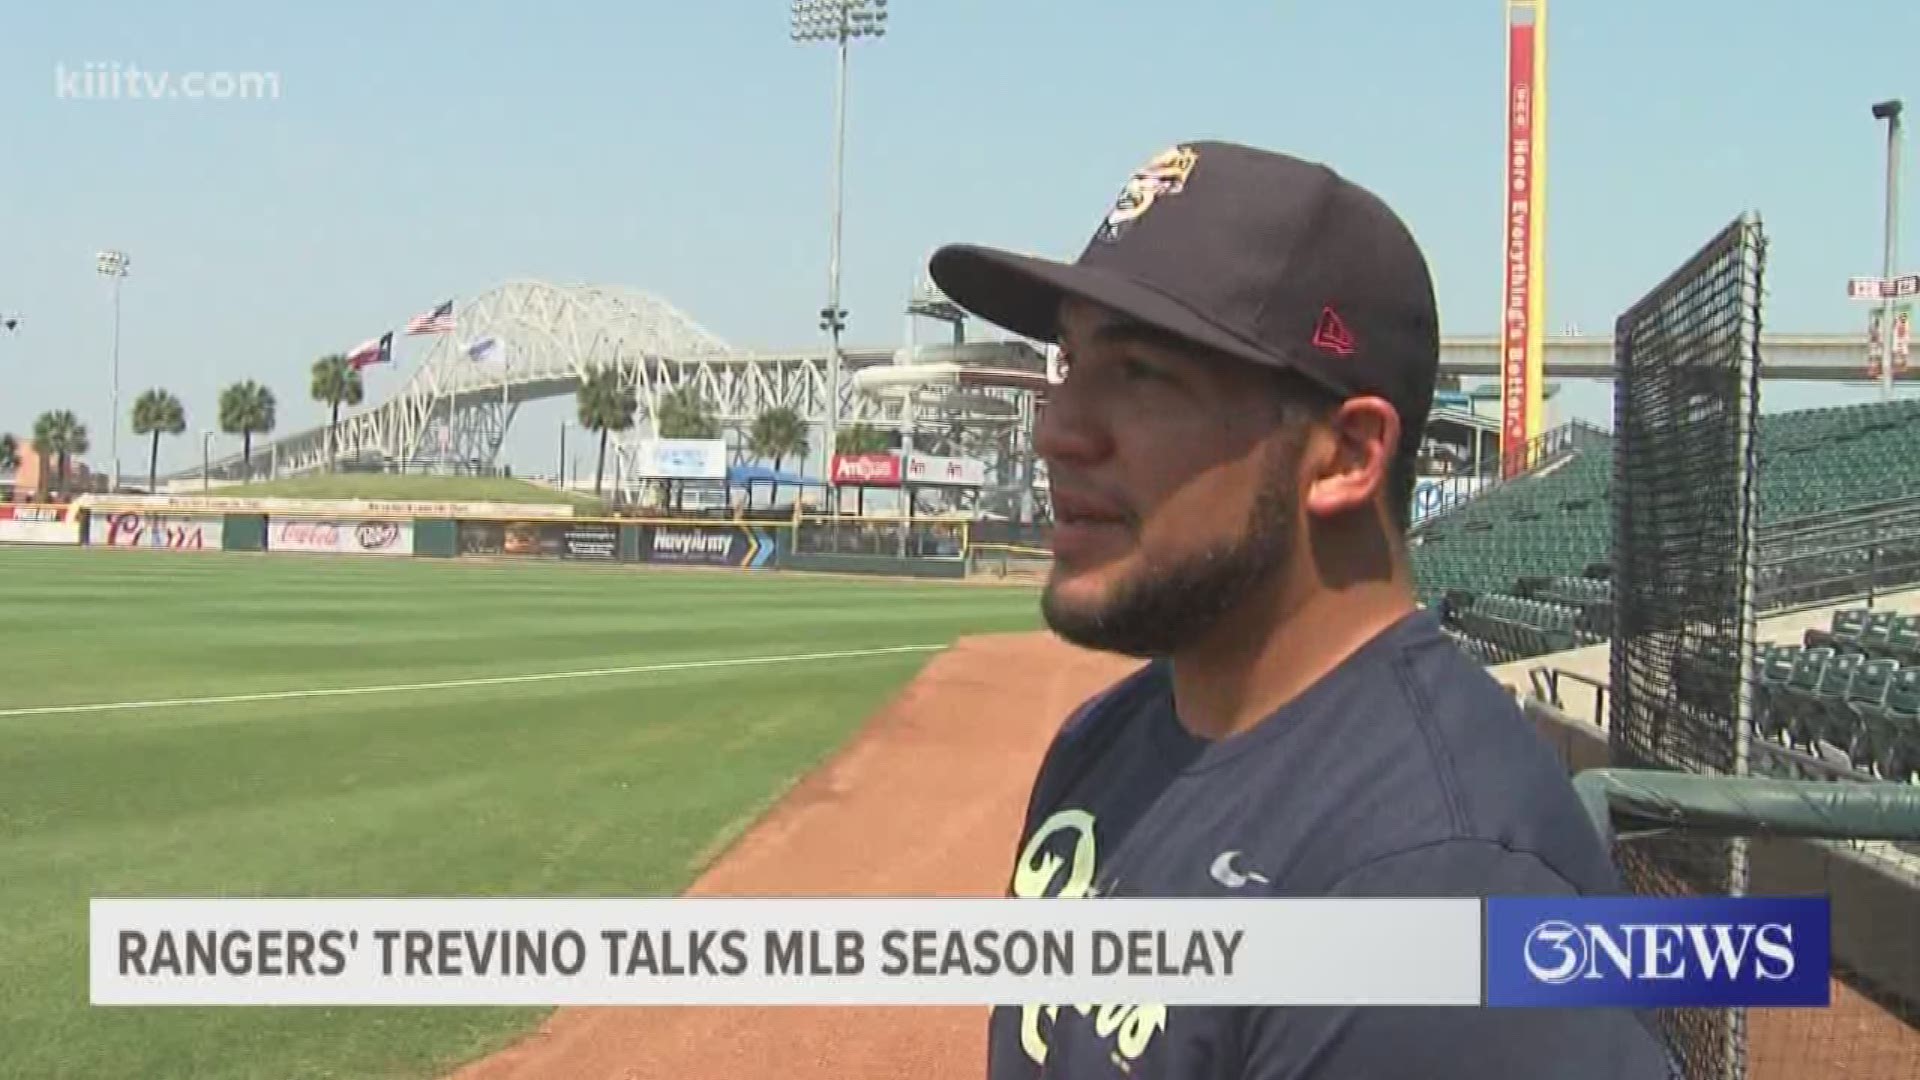 Texas Rangers Catcher Jose Trevino spoke with 3News' Travis Green on his time off from baseball due to the MLB season delay from Covid-19.